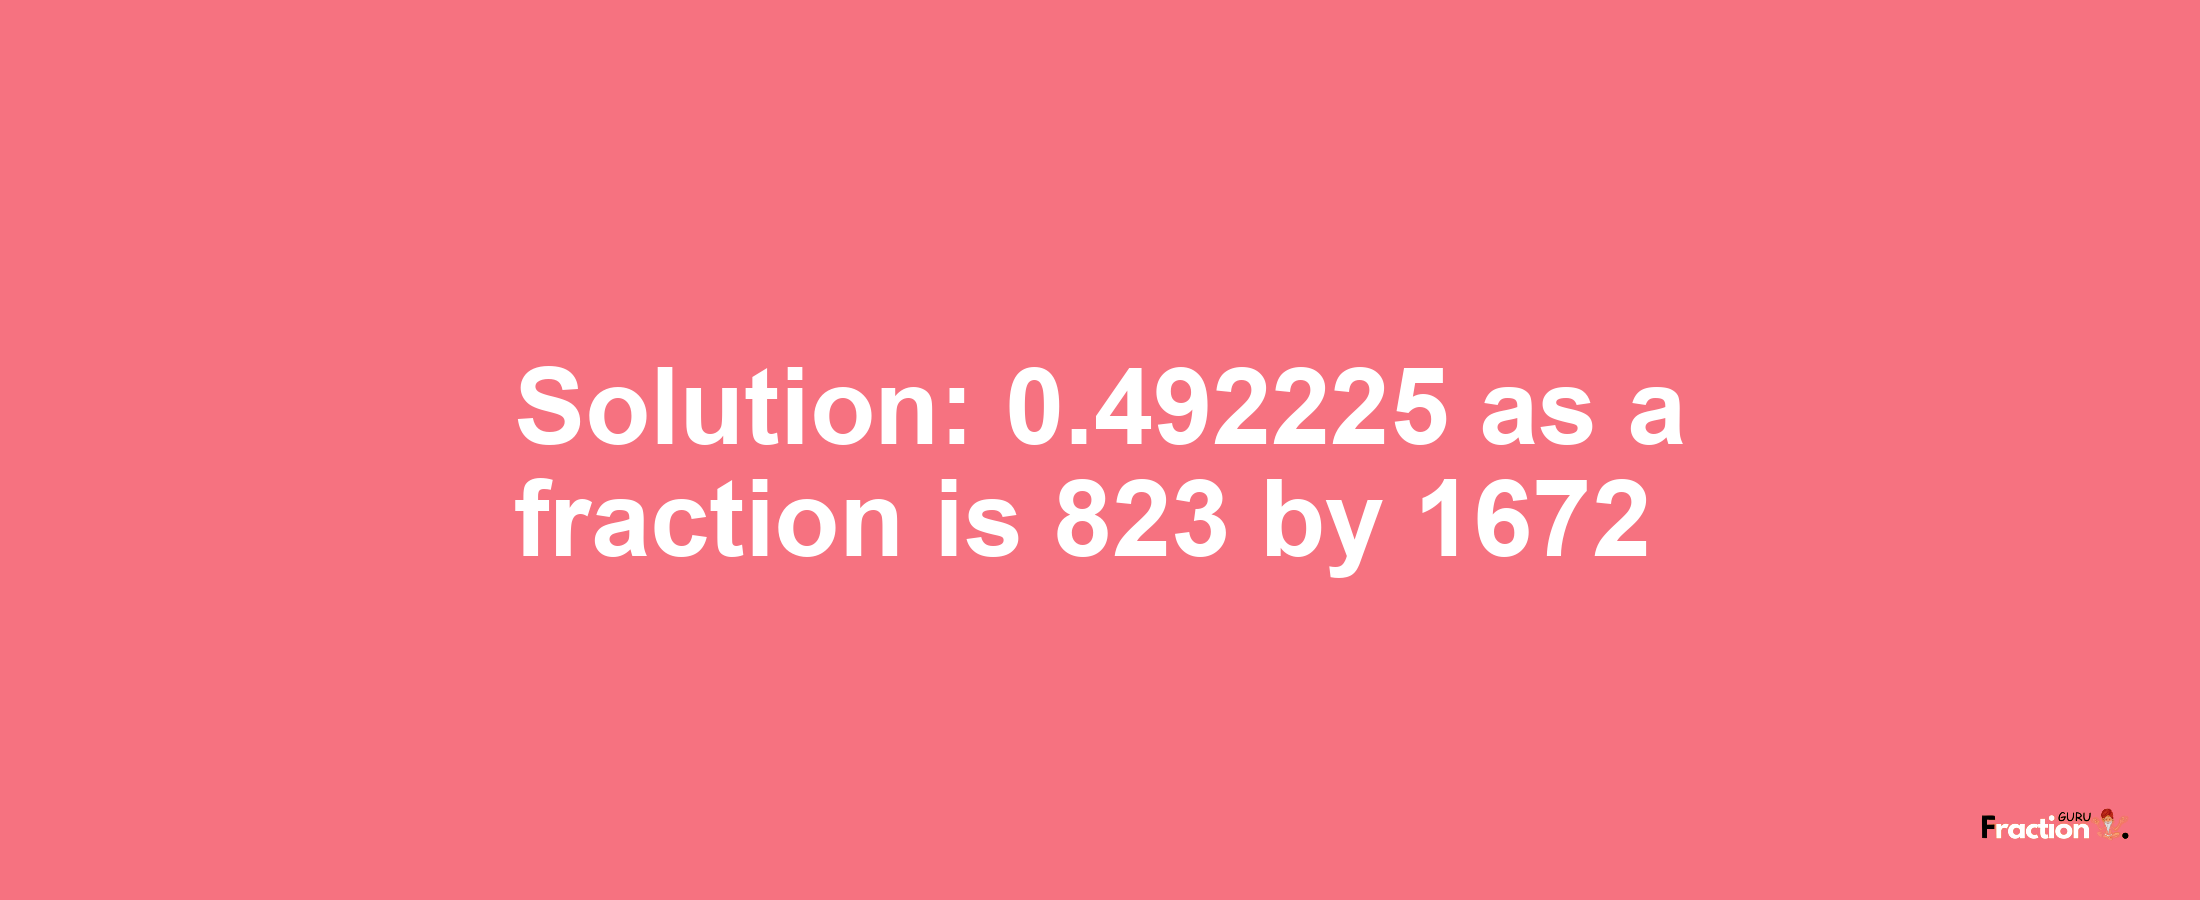 Solution:0.492225 as a fraction is 823/1672